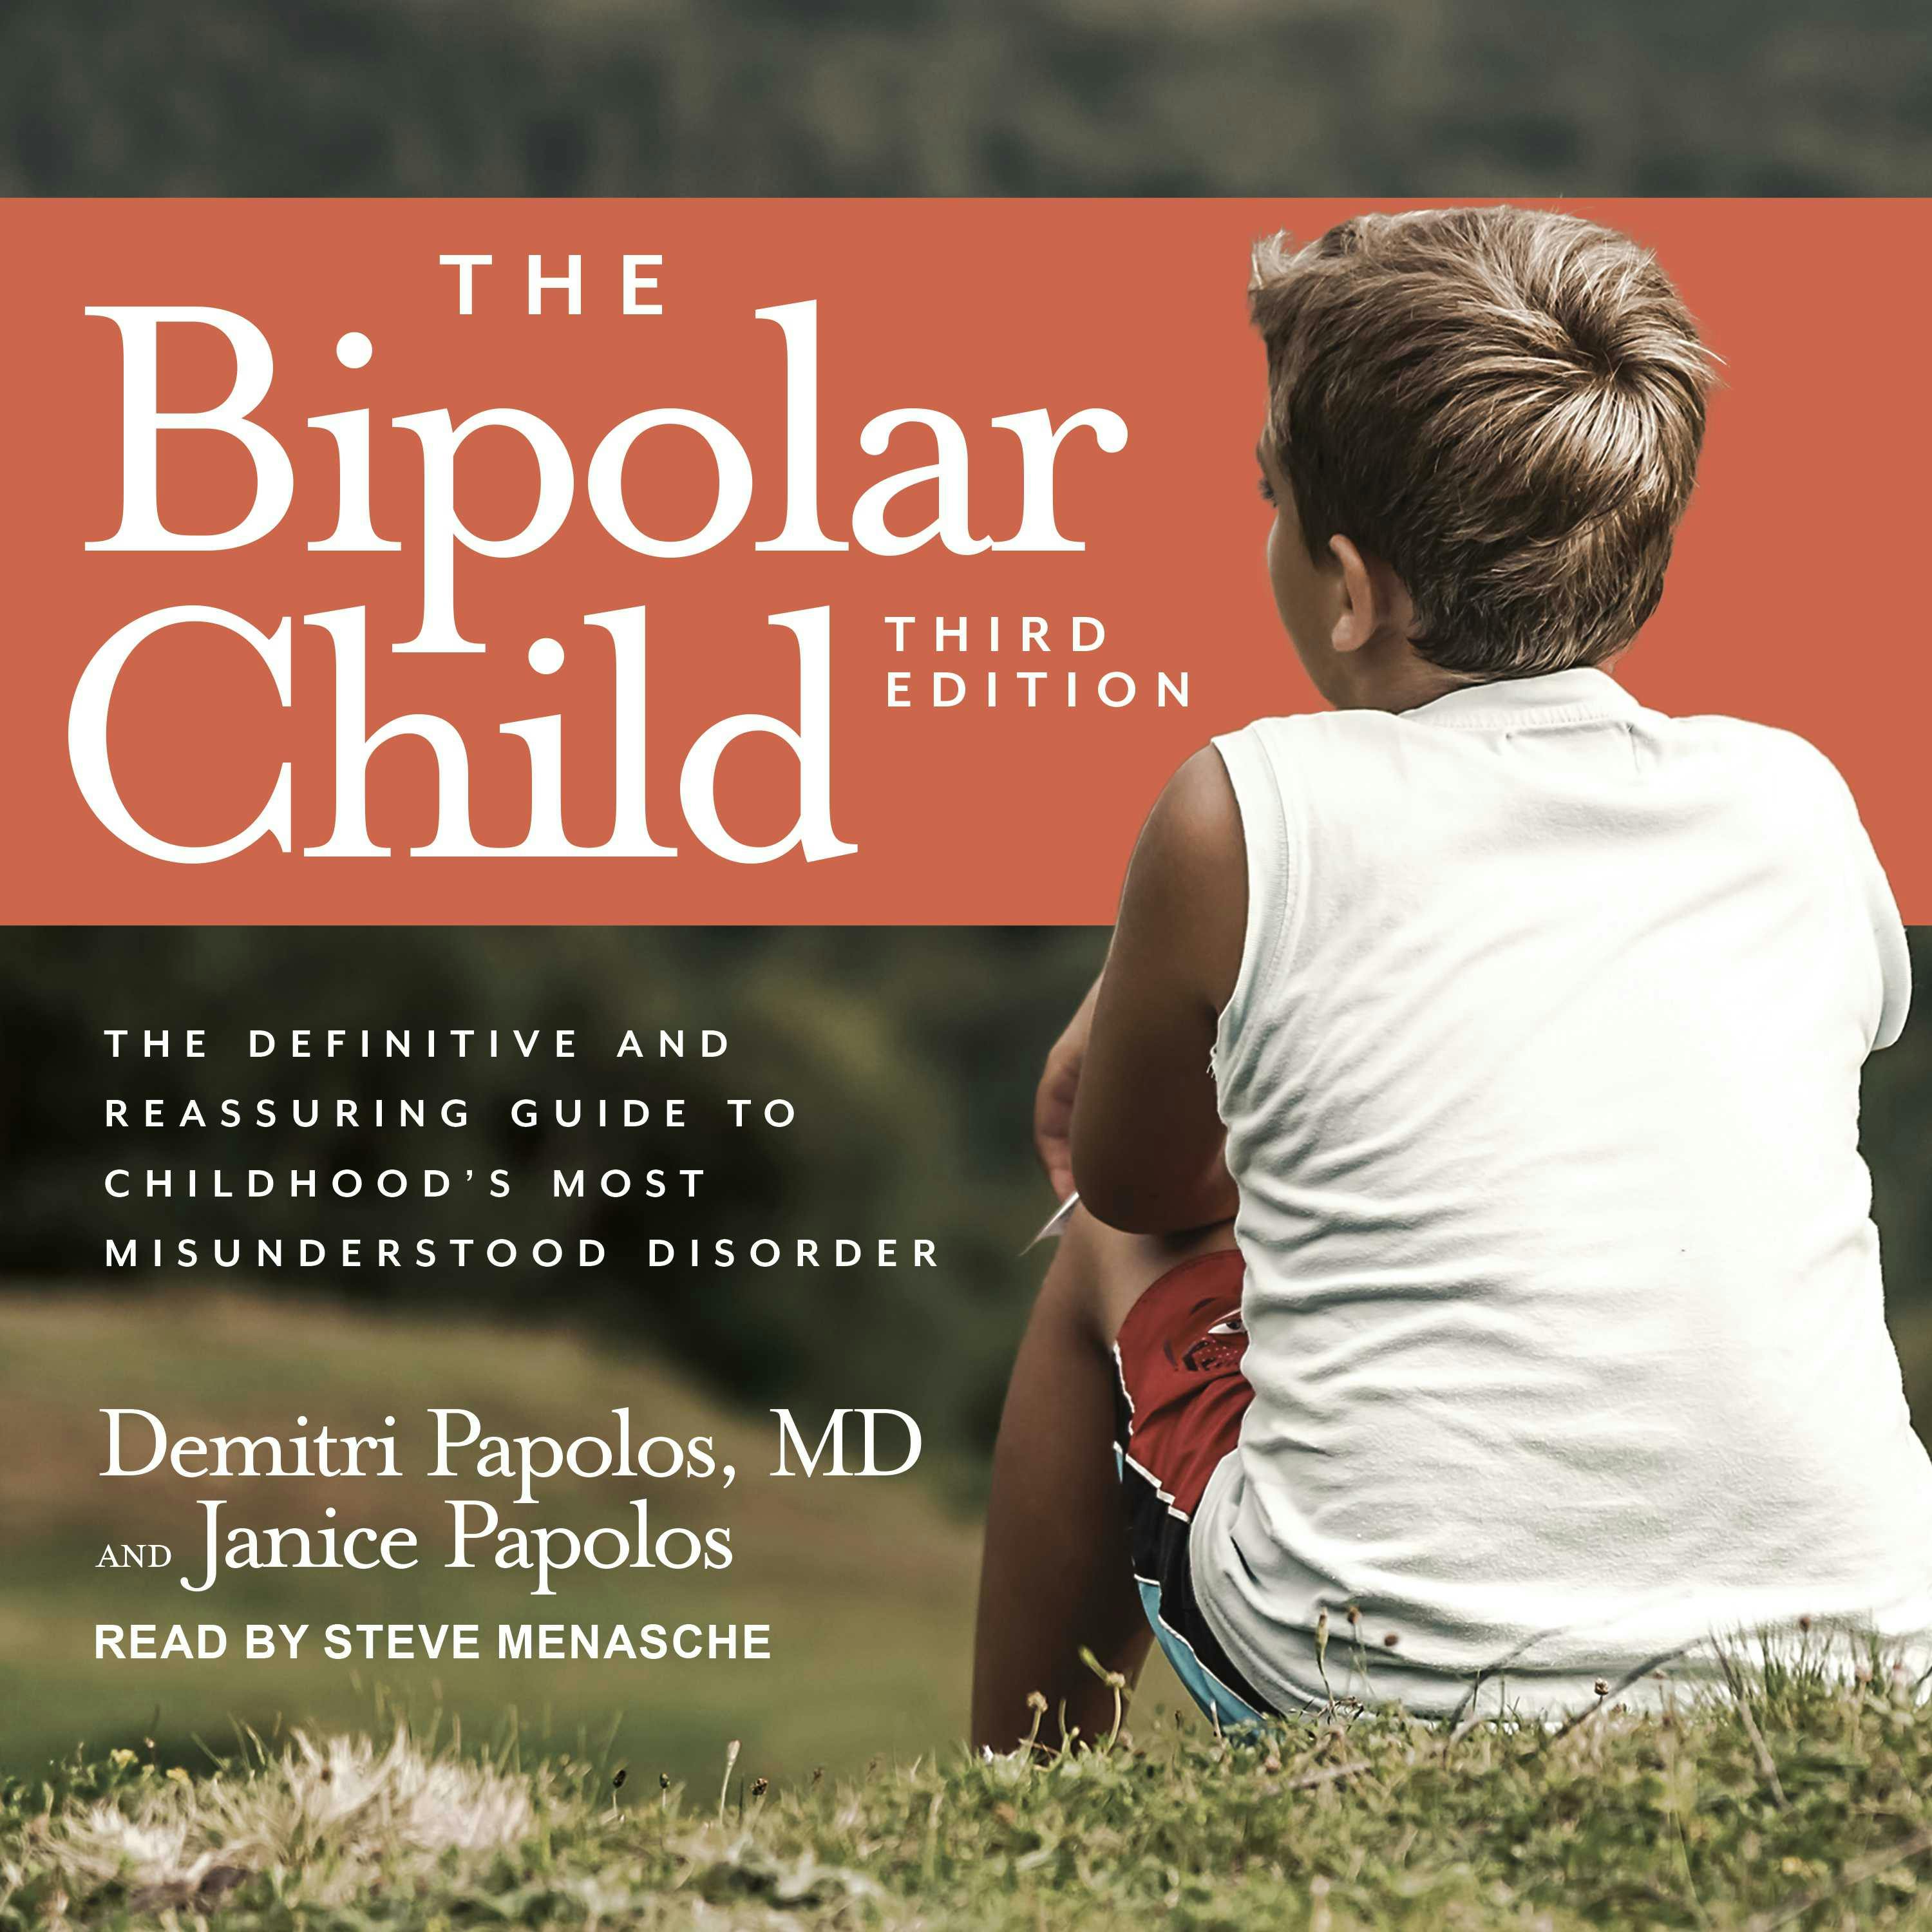 The Bipolar Child: The Definitive and Reassuring Guide to Childhood's Most Misunderstood Disorder (Third Edition) - undefined